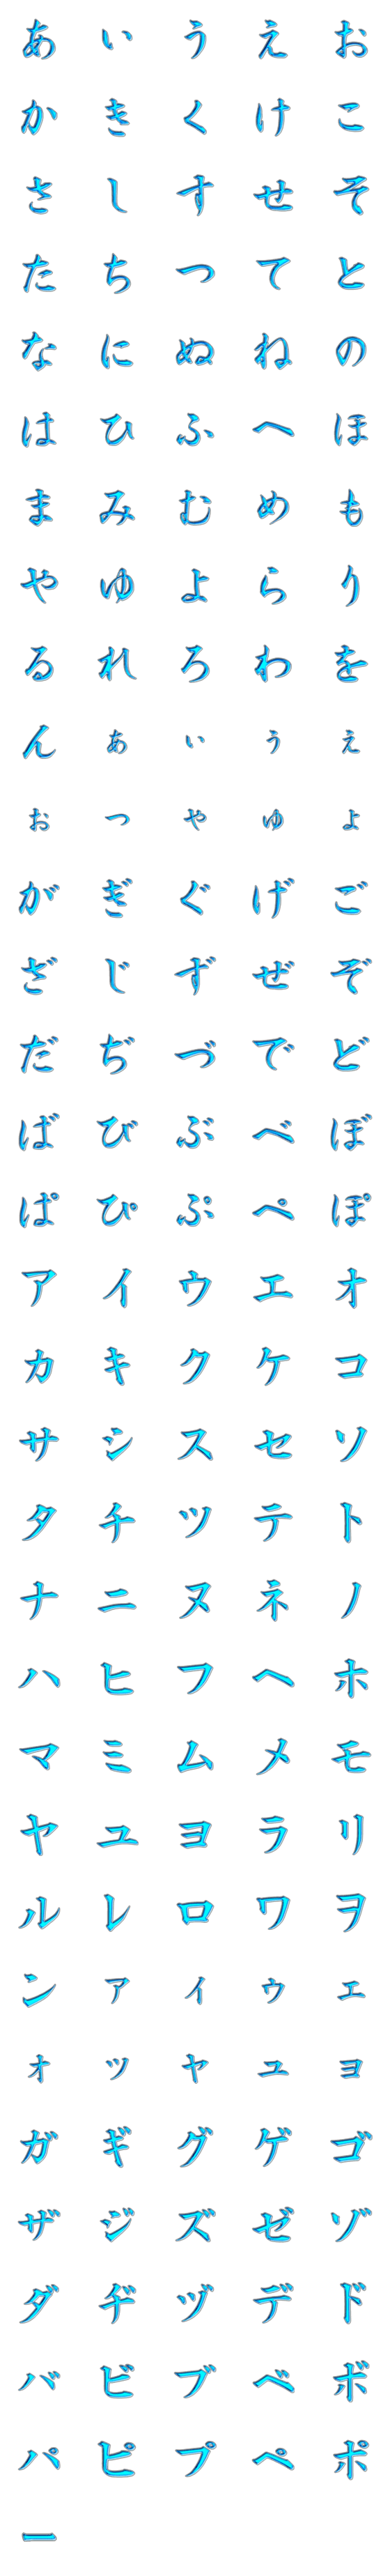 [LINE絵文字]三好一族の絵文字01の画像一覧